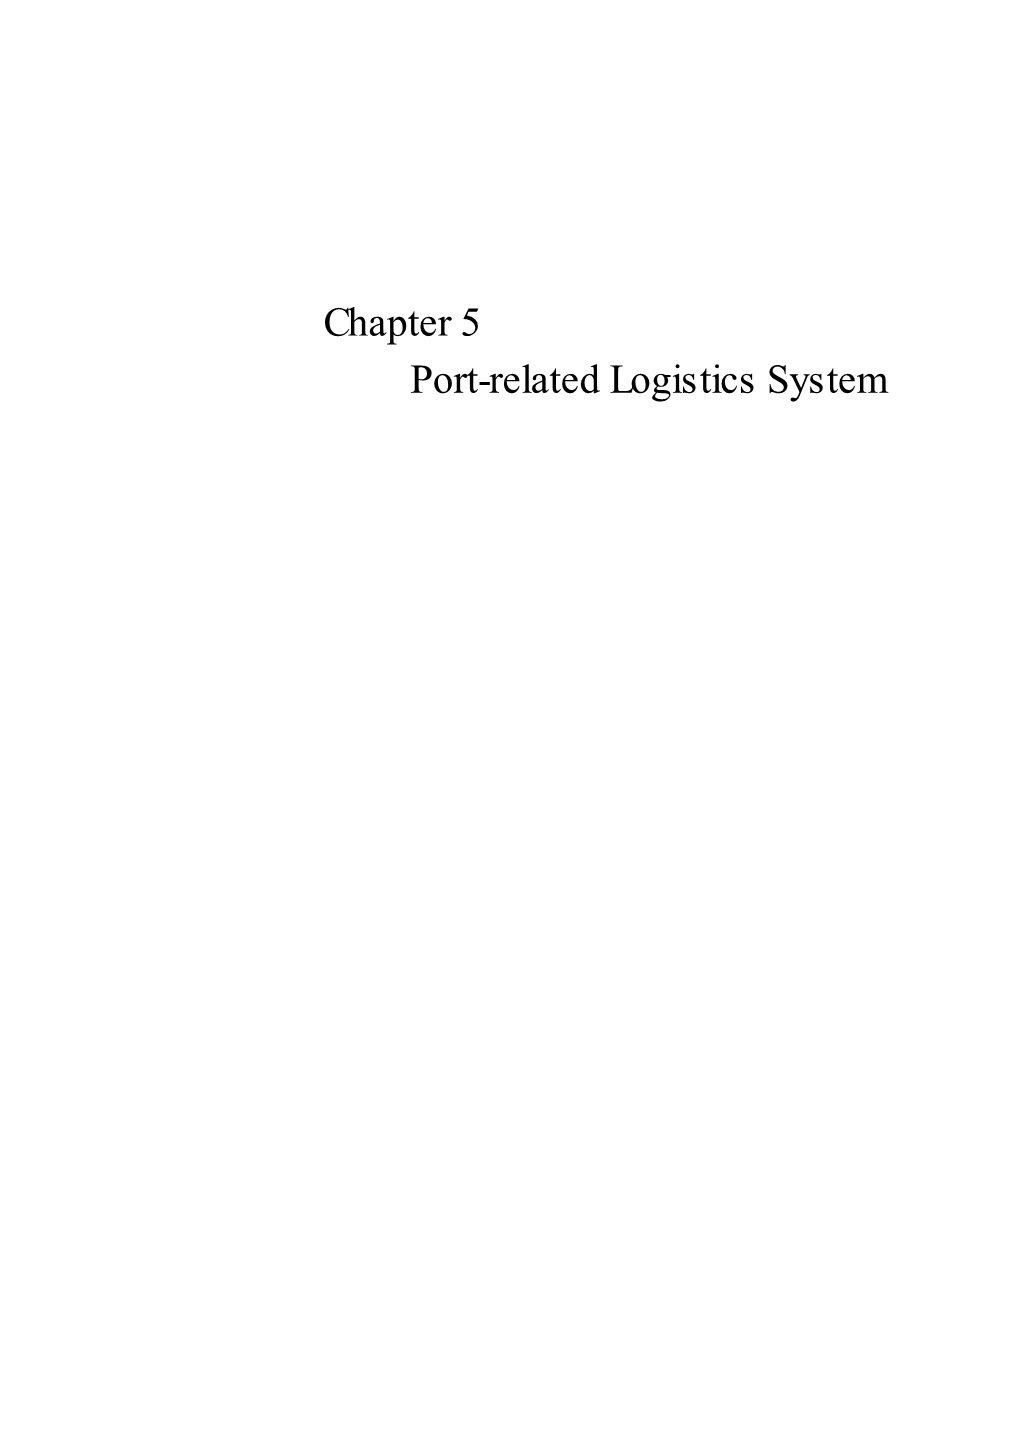 Chapter 5 Port-Related Logistics System